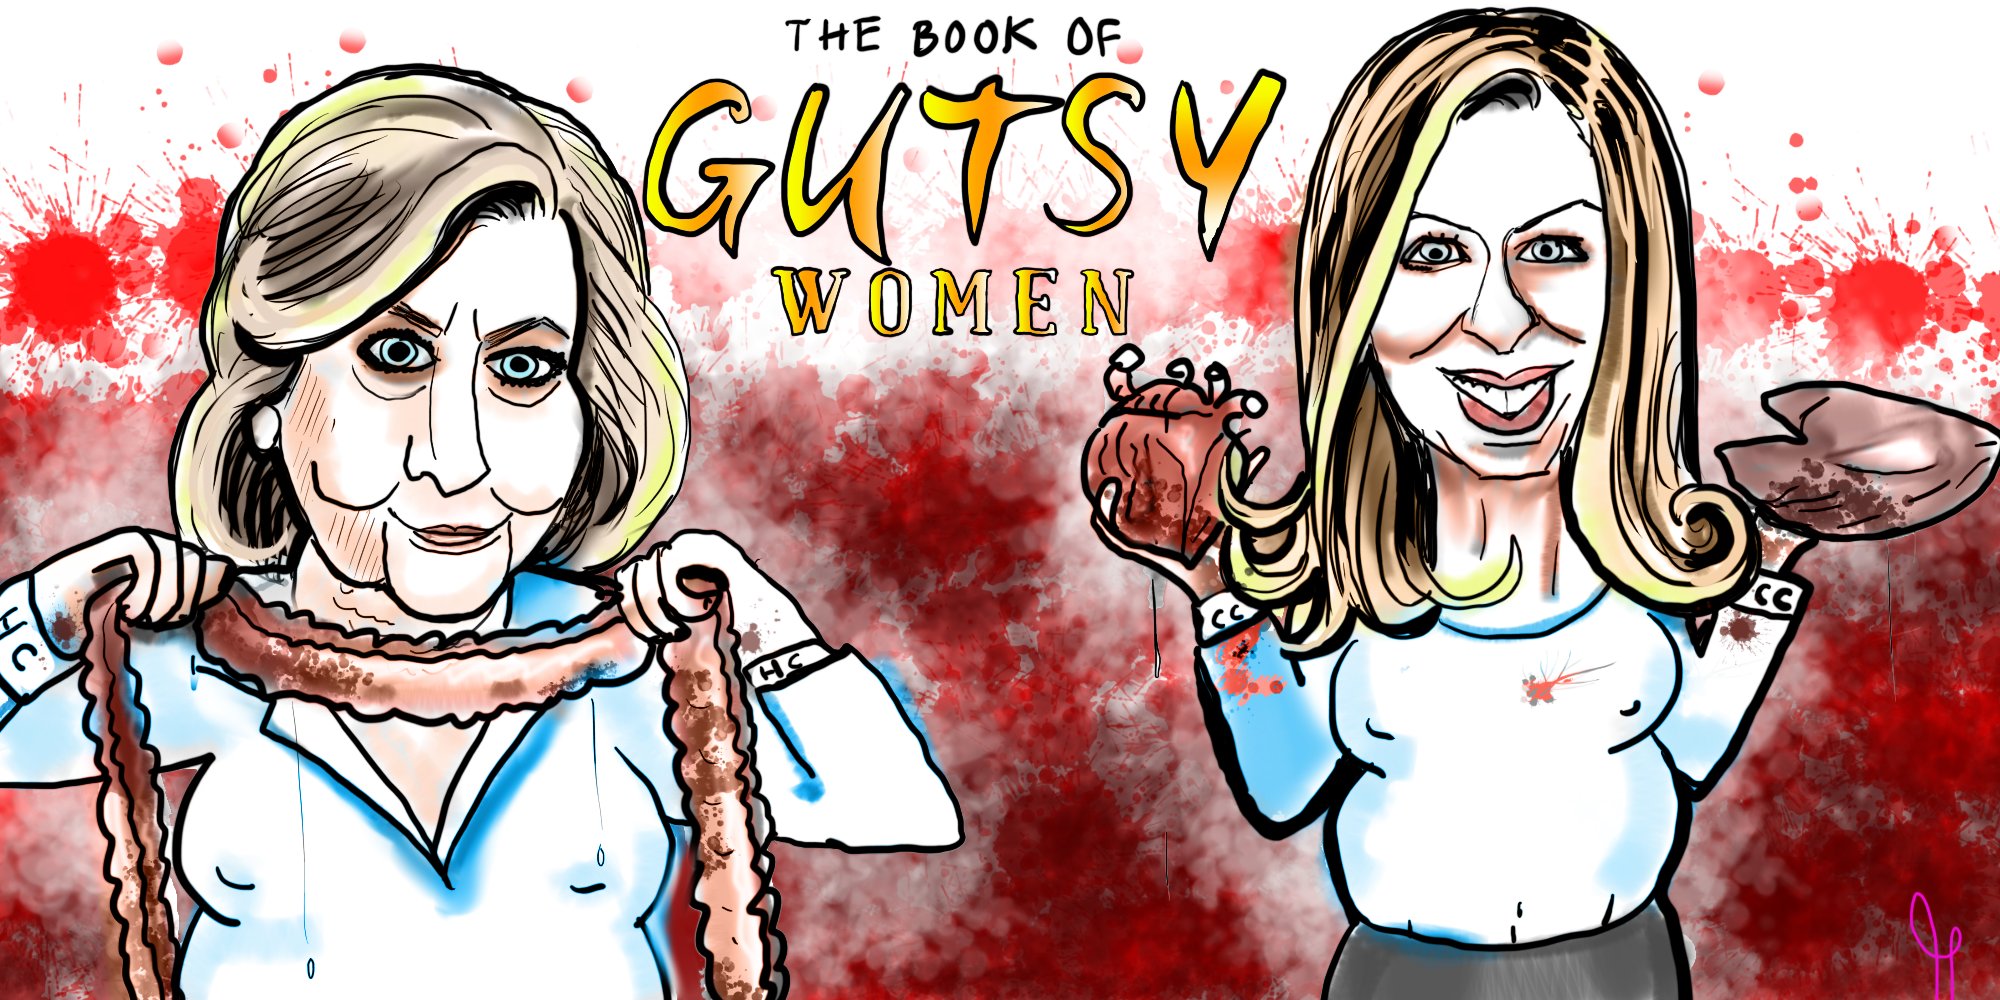 Hillary Rodham Clinton and Chelsea Clinton new book Gutsy women book review political cartoon post thumbnail image